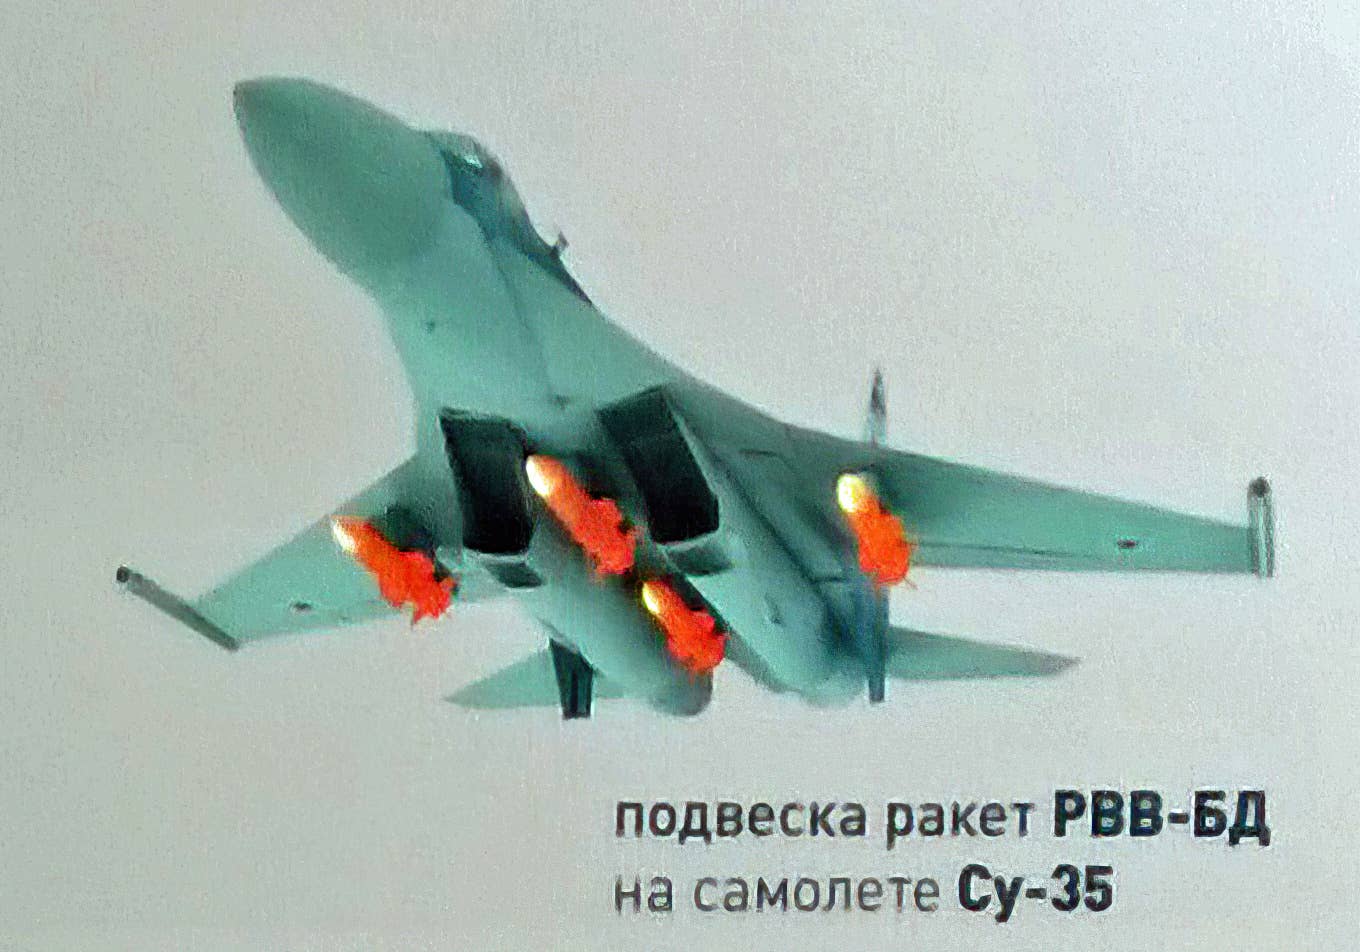 A model of a Su-35 armed with four RVV-BD missiles, as displayed by the Tactical Missiles Corporation. <em>Tactical Missiles Corporation</em>